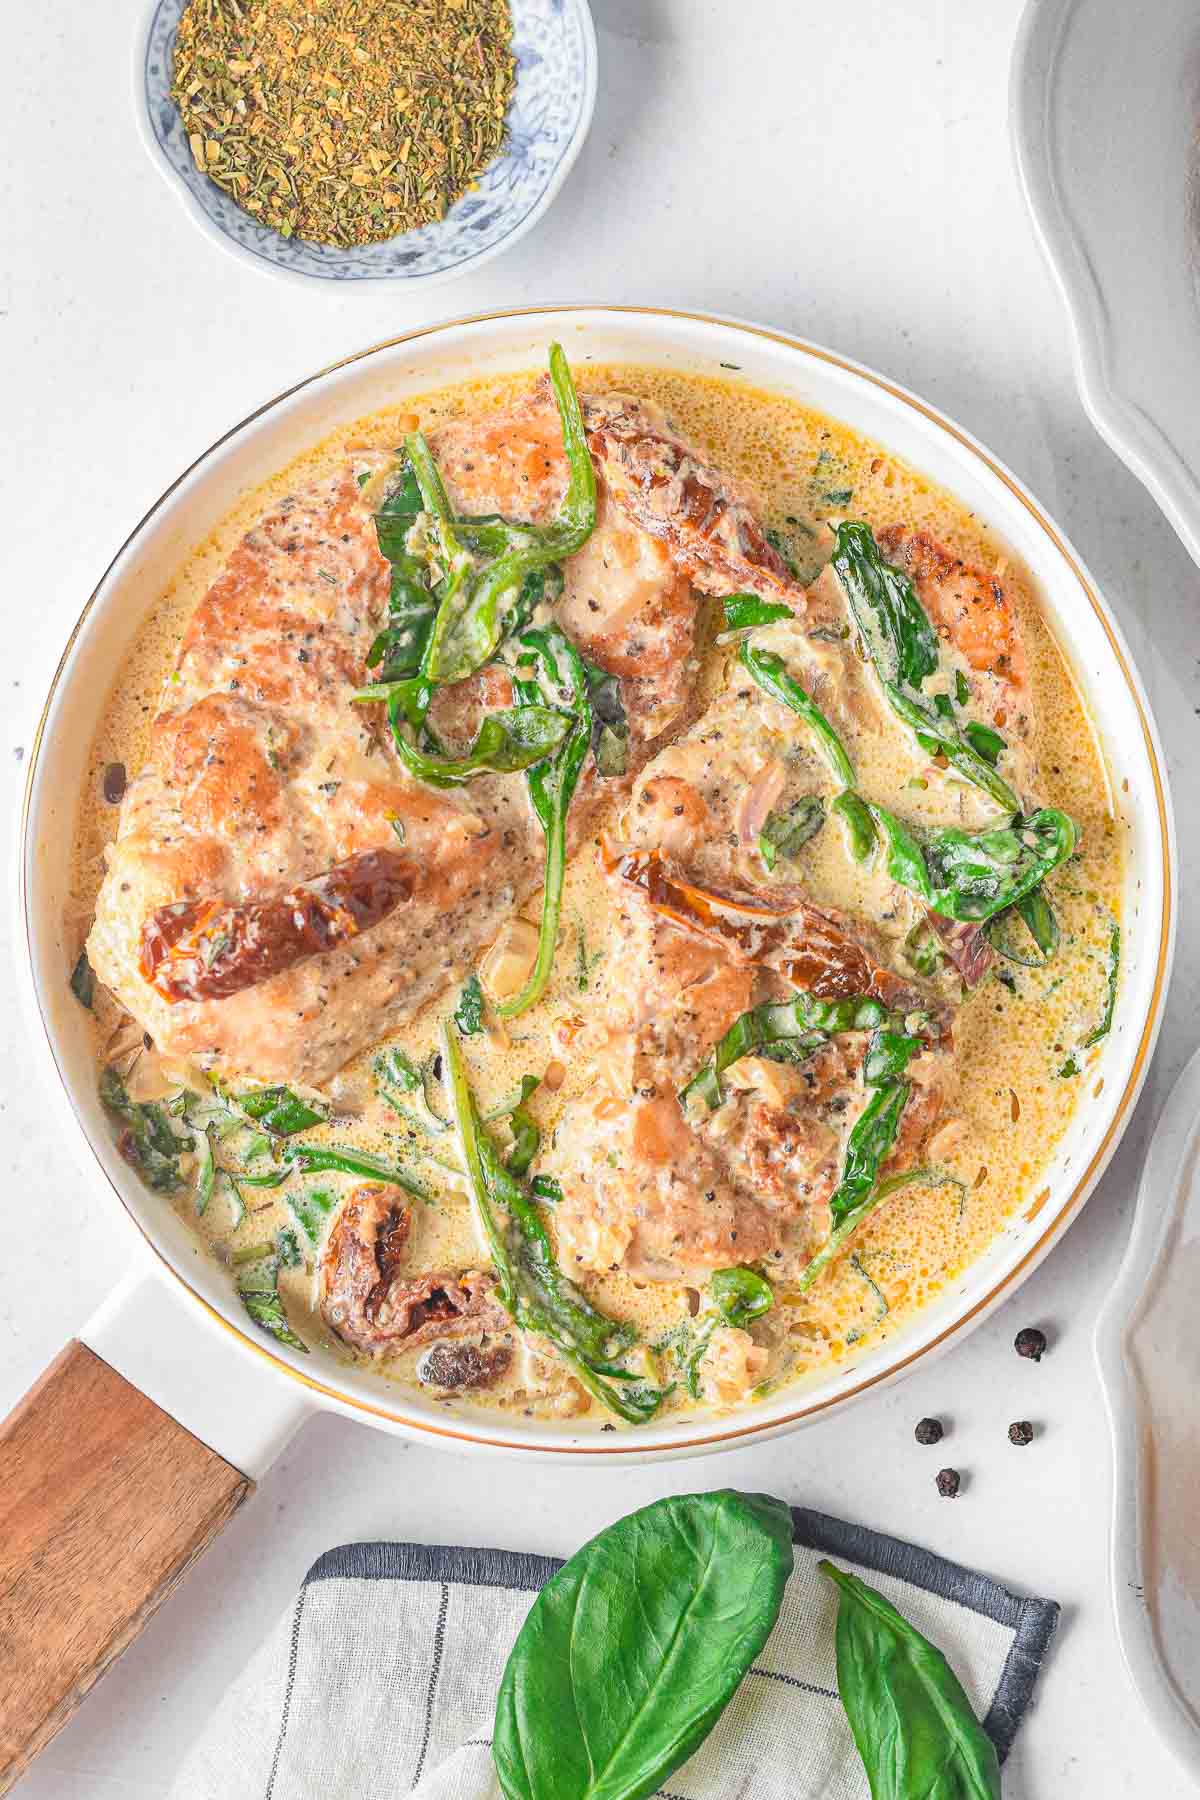 White skillet with tuscan chicken recipe with sun-dried tomatoes, spinach in a creamy sauce.